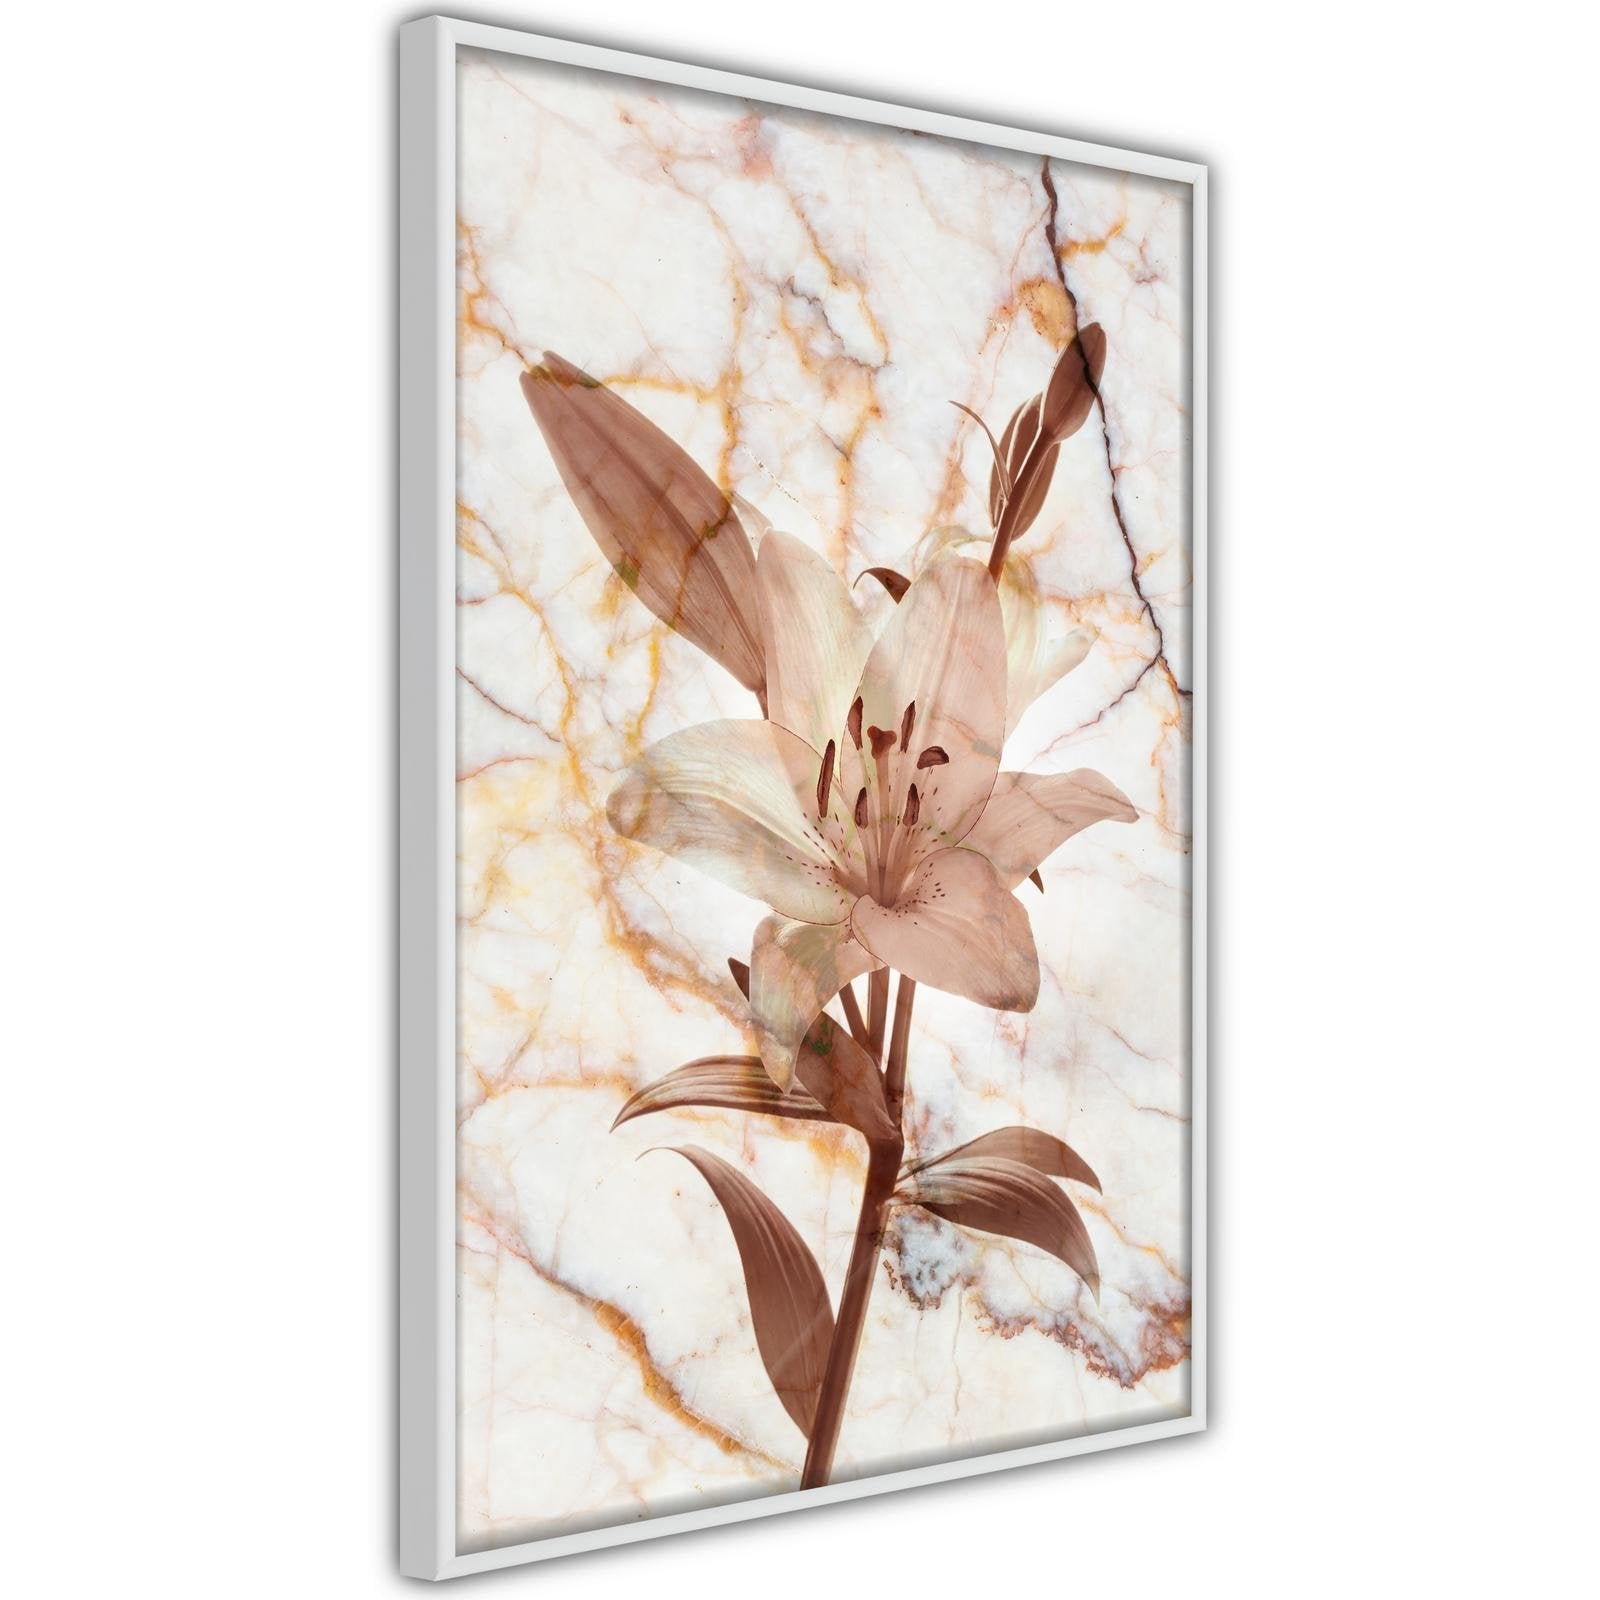 Inramad Poster / Tavla - Lily on Marble Background-Poster Inramad-Artgeist-peaceofhome.se